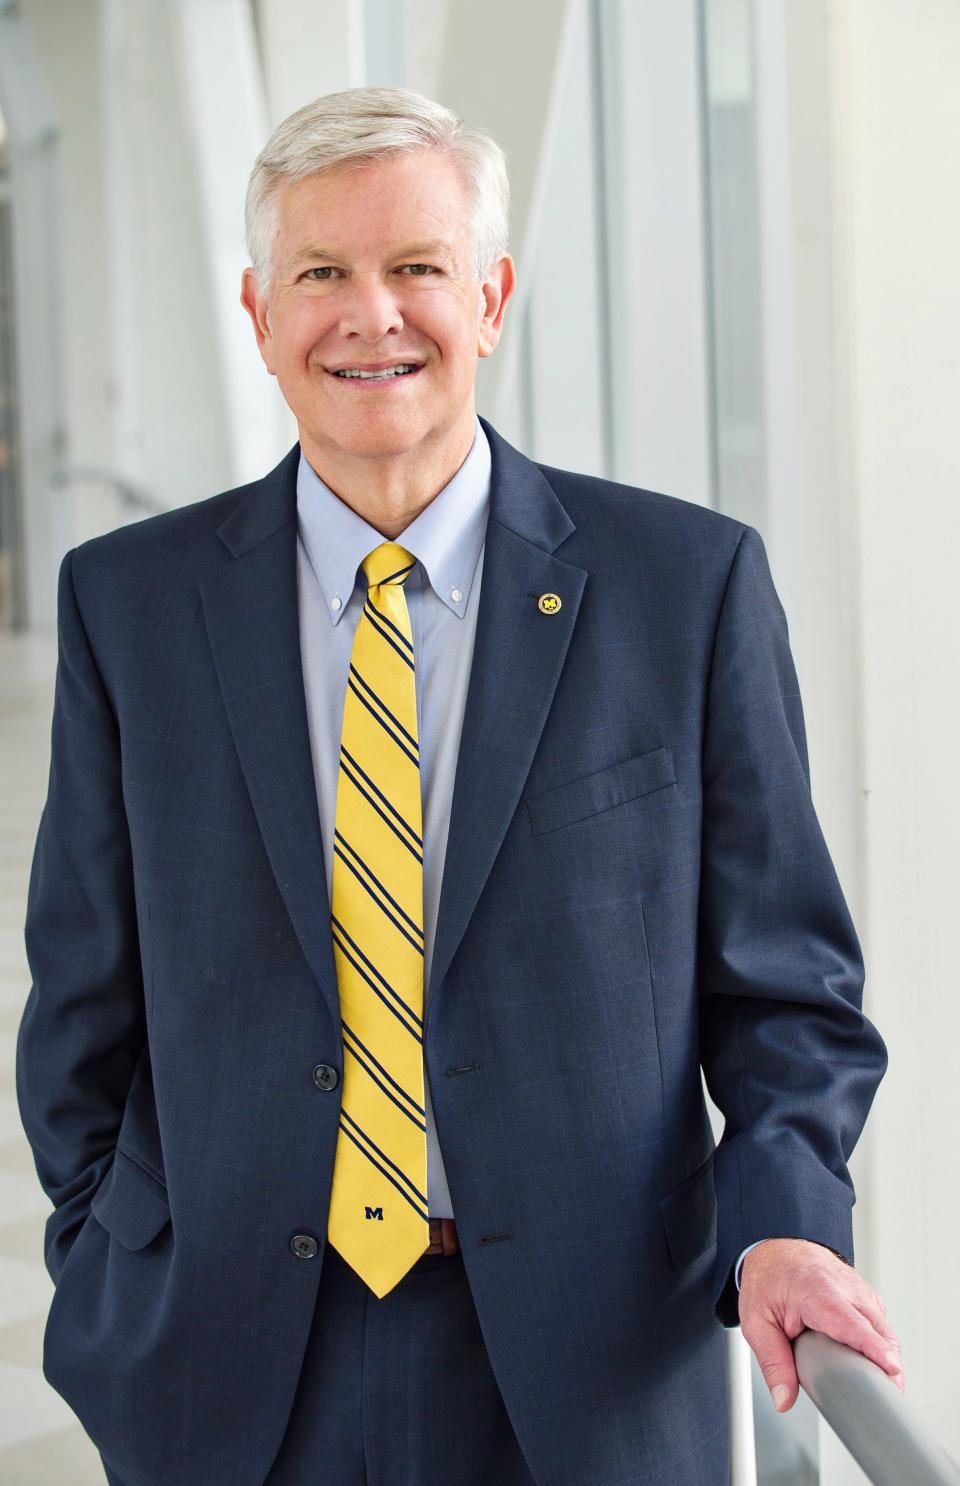 Dr. Marschall Runge, CEO of Michigan Medicine, dean of the University of Michigan Medical School and executive vice president for medical affairs at the University of Michigan.